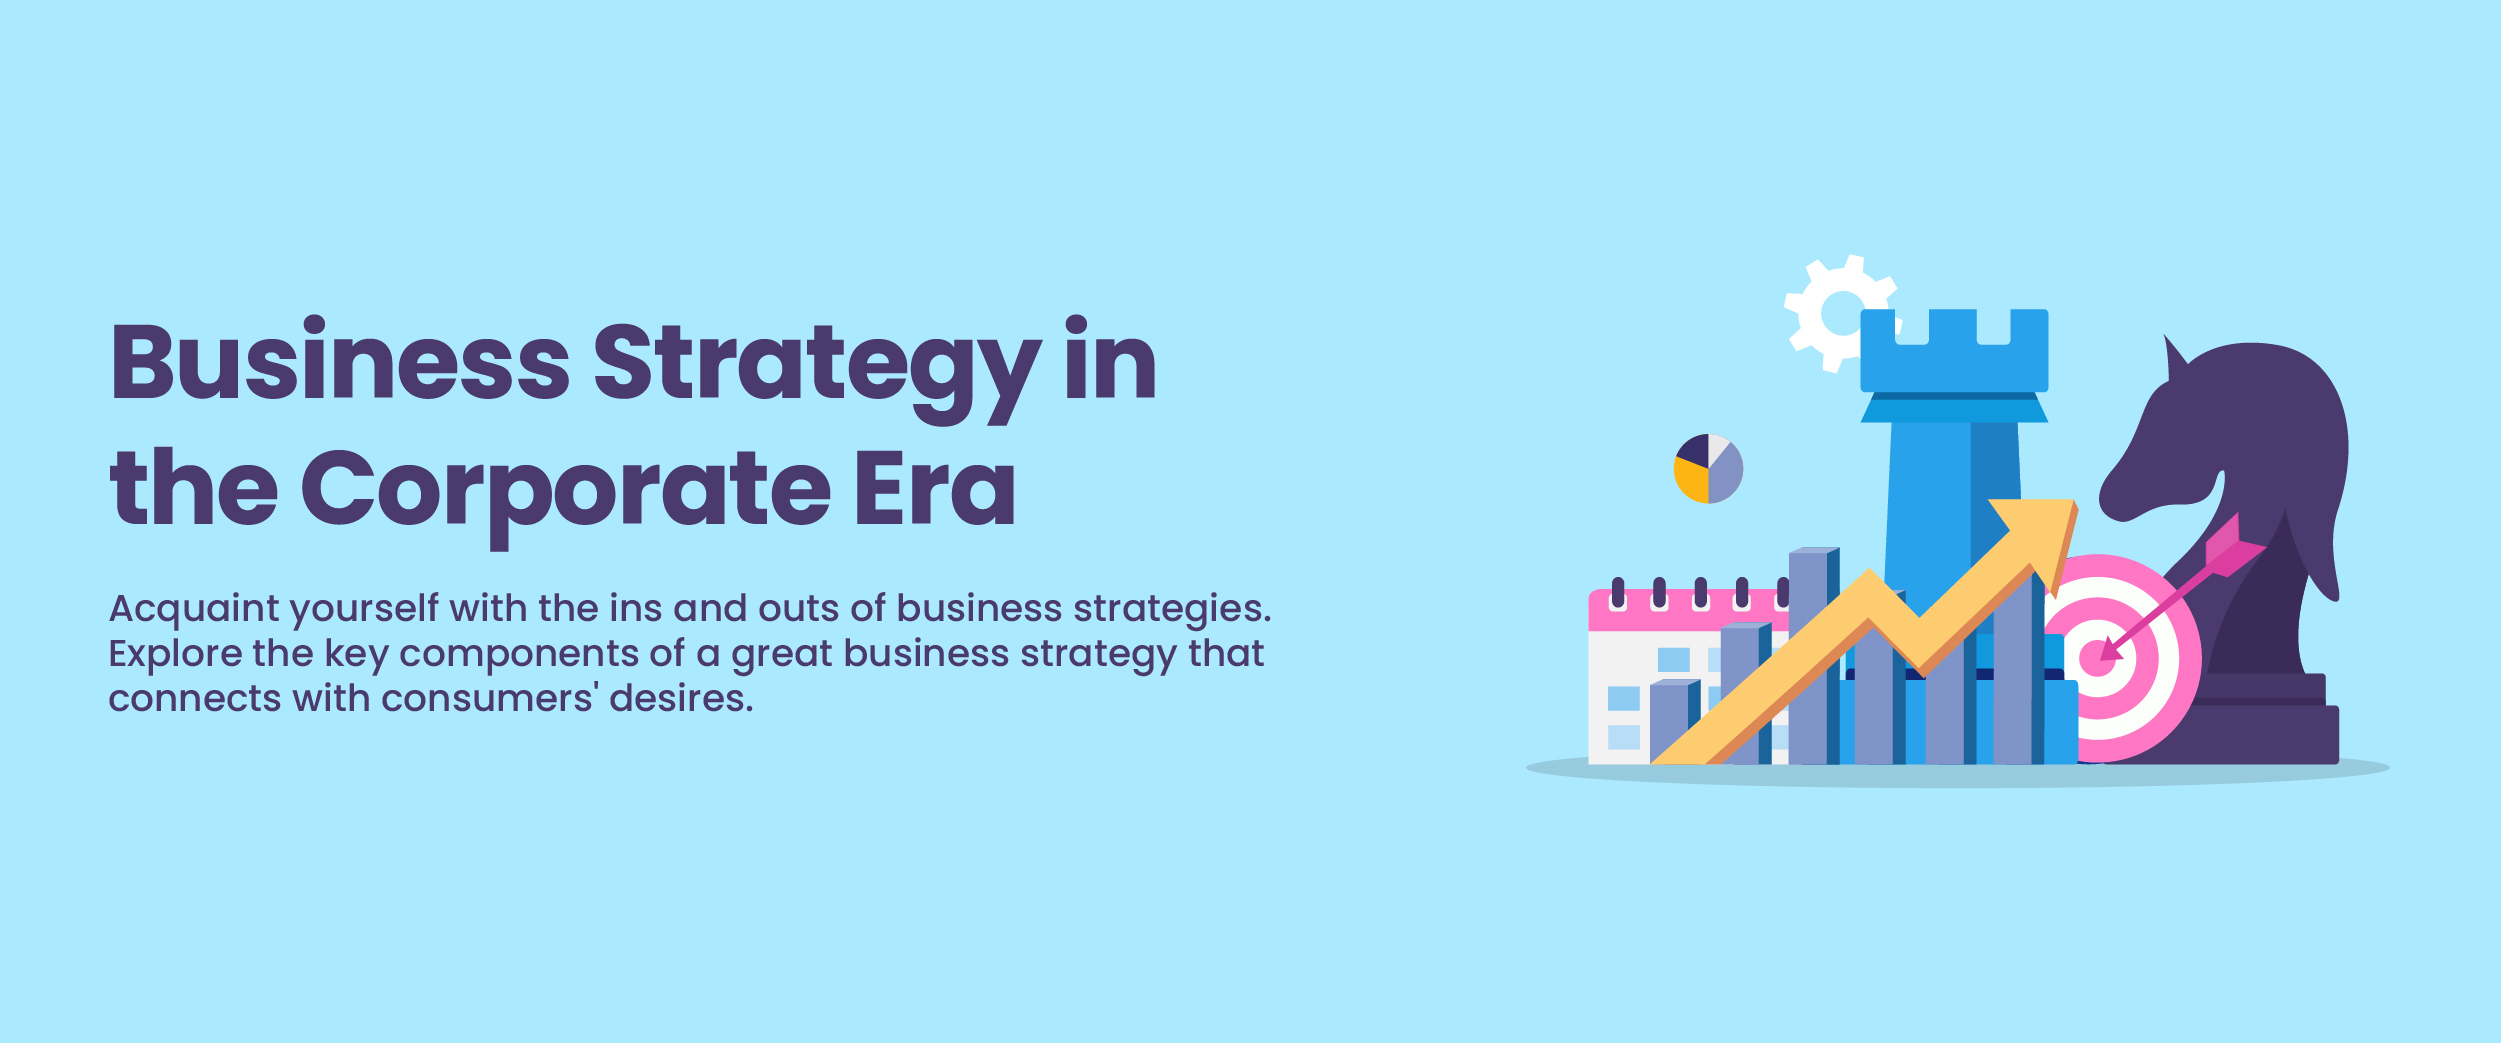 Business Strategy in the Corporate Era